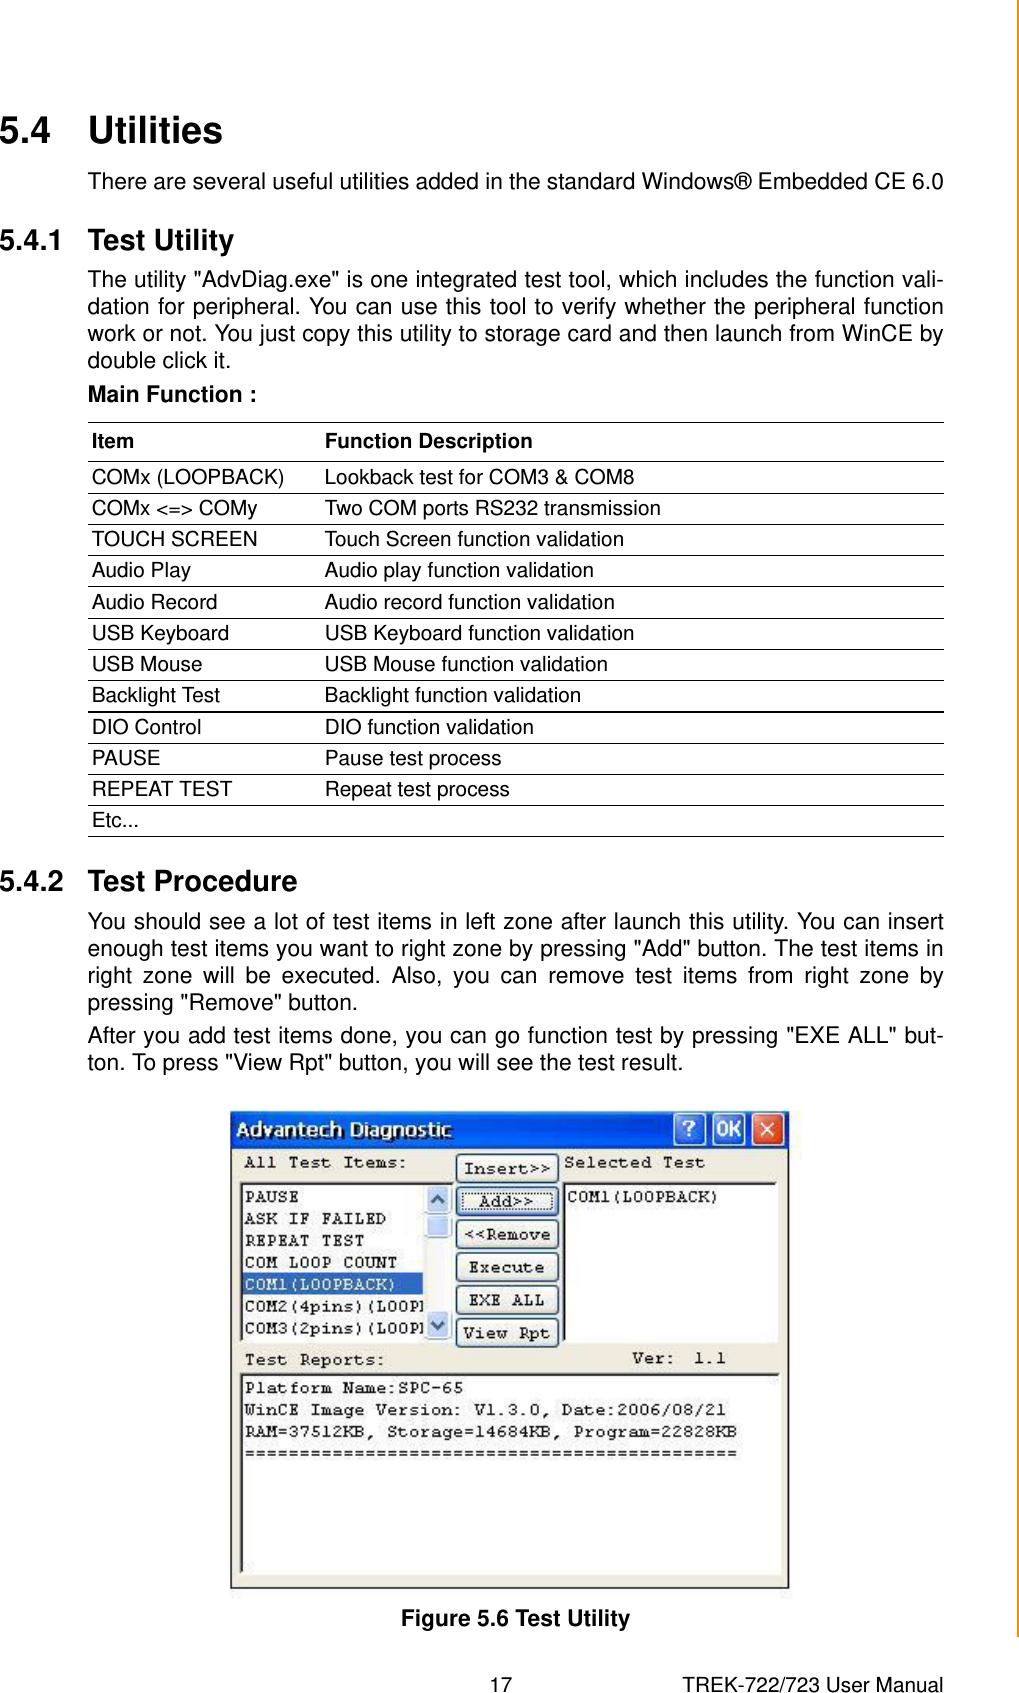 17 TREK-722/723 User ManualChapter 5 Software Functionality5.4 UtilitiesThere are several useful utilities added in the standard Windows® Embedded CE 6.05.4.1 Test UtilityThe utility &quot;AdvDiag.exe&quot; is one integrated test tool, which includes the function vali-dation for peripheral. You can use this tool to verify whether the peripheral functionwork or not. You just copy this utility to storage card and then launch from WinCE bydouble click it.Main Function :5.4.2 Test ProcedureYou should see a lot of test items in left zone after launch this utility. You can insertenough test items you want to right zone by pressing &quot;Add&quot; button. The test items inright zone will be executed. Also, you can remove test items from right zone bypressing &quot;Remove&quot; button. After you add test items done, you can go function test by pressing &quot;EXE ALL&quot; but-ton. To press &quot;View Rpt&quot; button, you will see the test result.Figure 5.6 Test UtilityItem Function DescriptionCOMx (LOOPBACK) Lookback test for COM3 &amp; COM8COMx &lt;=&gt; COMy Two COM ports RS232 transmissionTOUCH SCREEN Touch Screen function validationAudio Play Audio play function validationAudio Record Audio record function validationUSB Keyboard USB Keyboard function validationUSB Mouse USB Mouse function validationBacklight Test Backlight function validationDIO Control DIO function validationPAUSE Pause test processREPEAT TEST Repeat test processEtc...